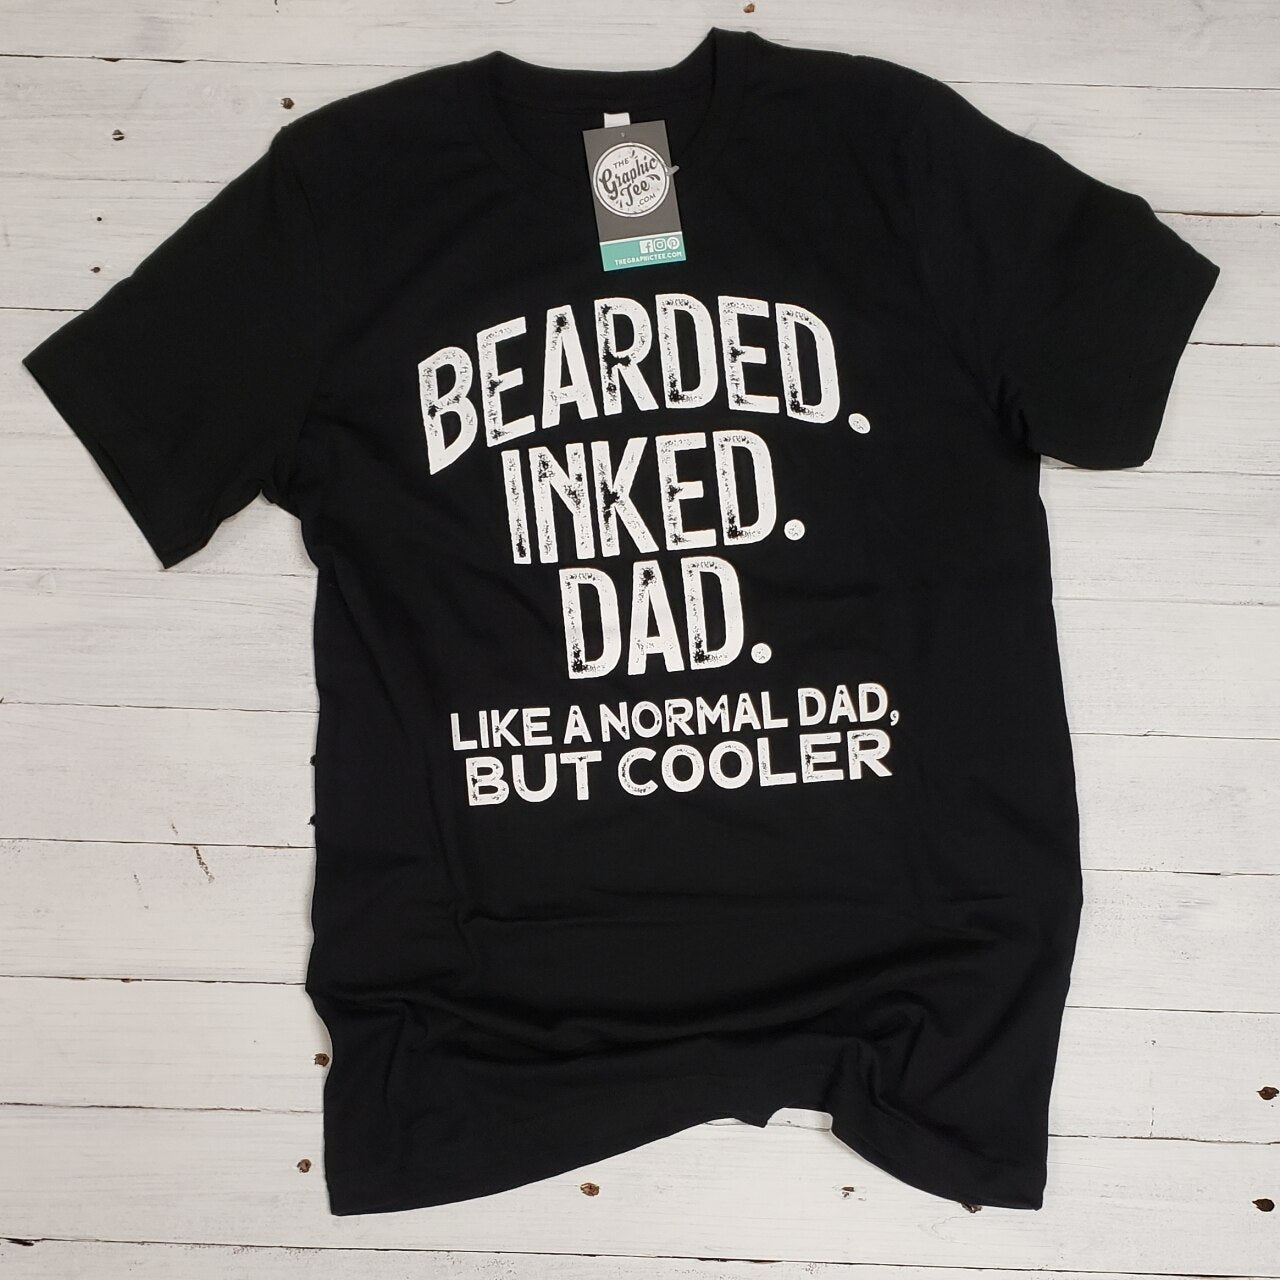 Bearded Inked Dad Tee - The Graphic Tee